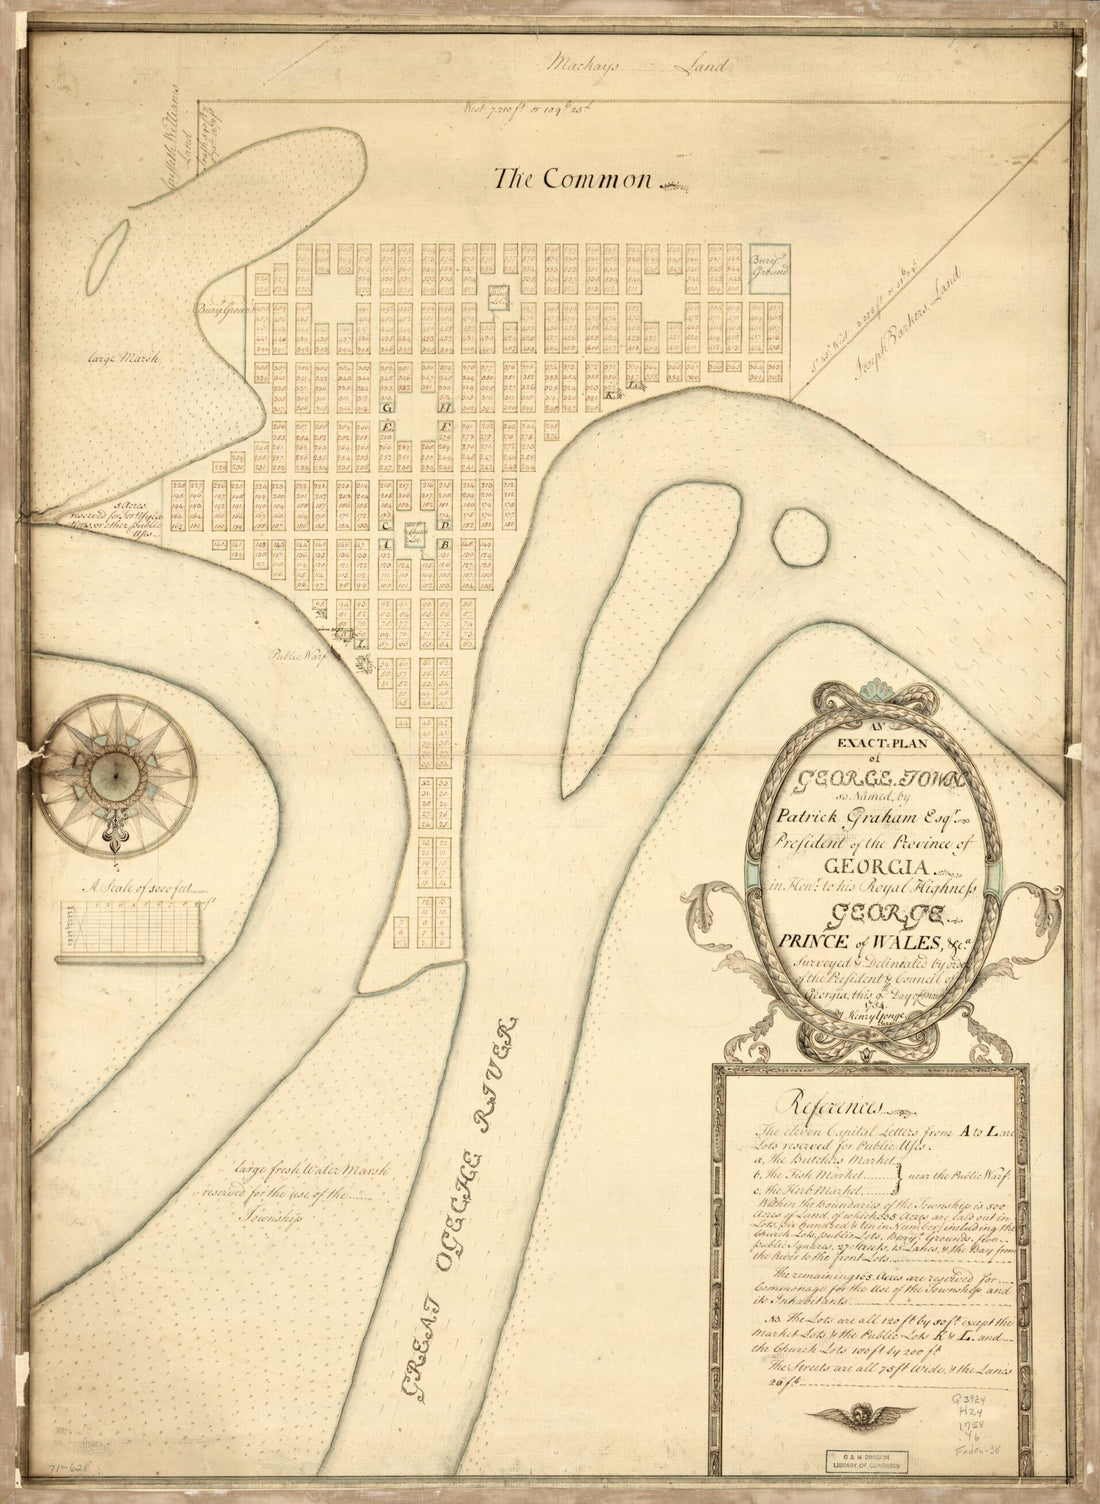 This old map of Plan of George-Town So Named by Patrick Graham, Esqr., President of the Province of Georgia, In Honr. to His Royal Highness George, Prince of Wales, &amp;ca from 1754 was created by Henry Yonge in 1754